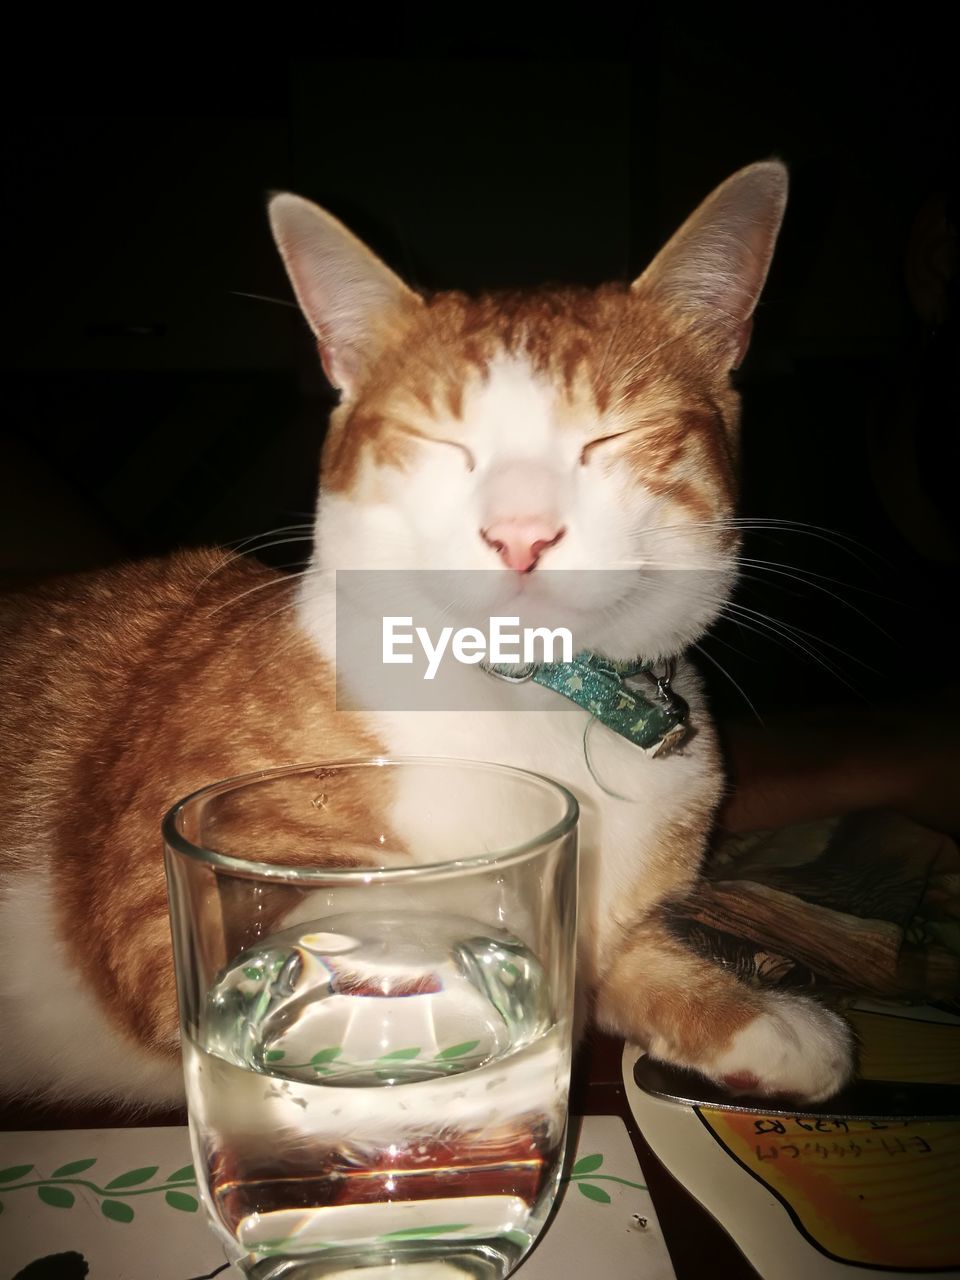 CLOSE-UP OF A CAT DRINKING GLASS WITH A EYES